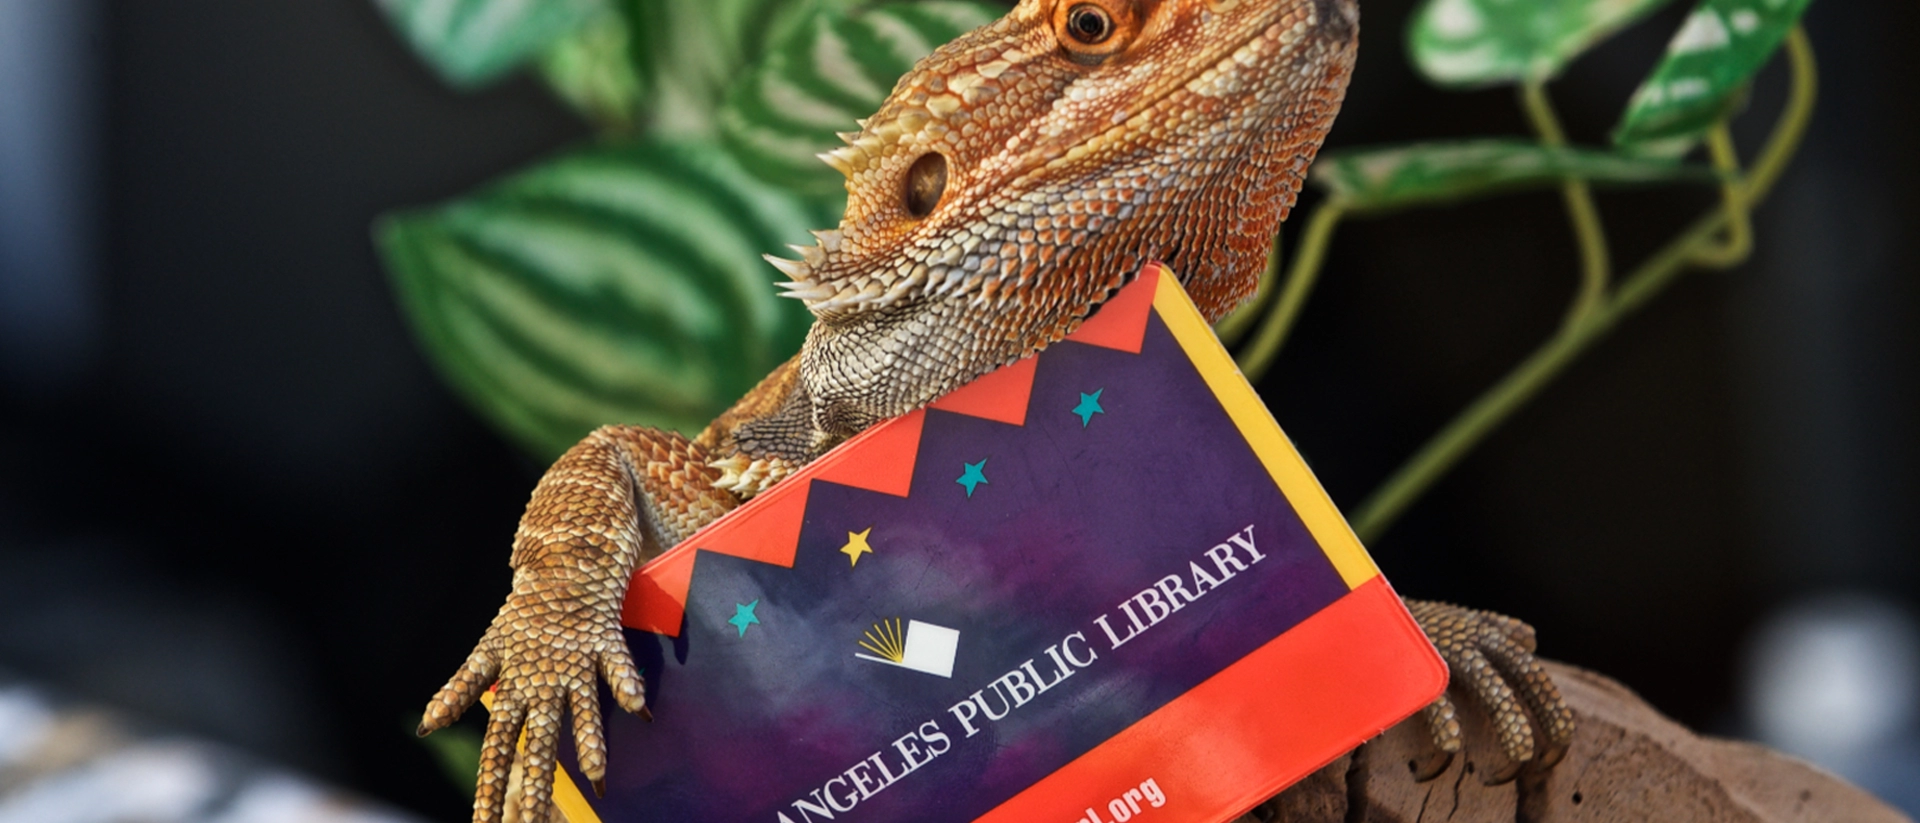 Lizard holding library card